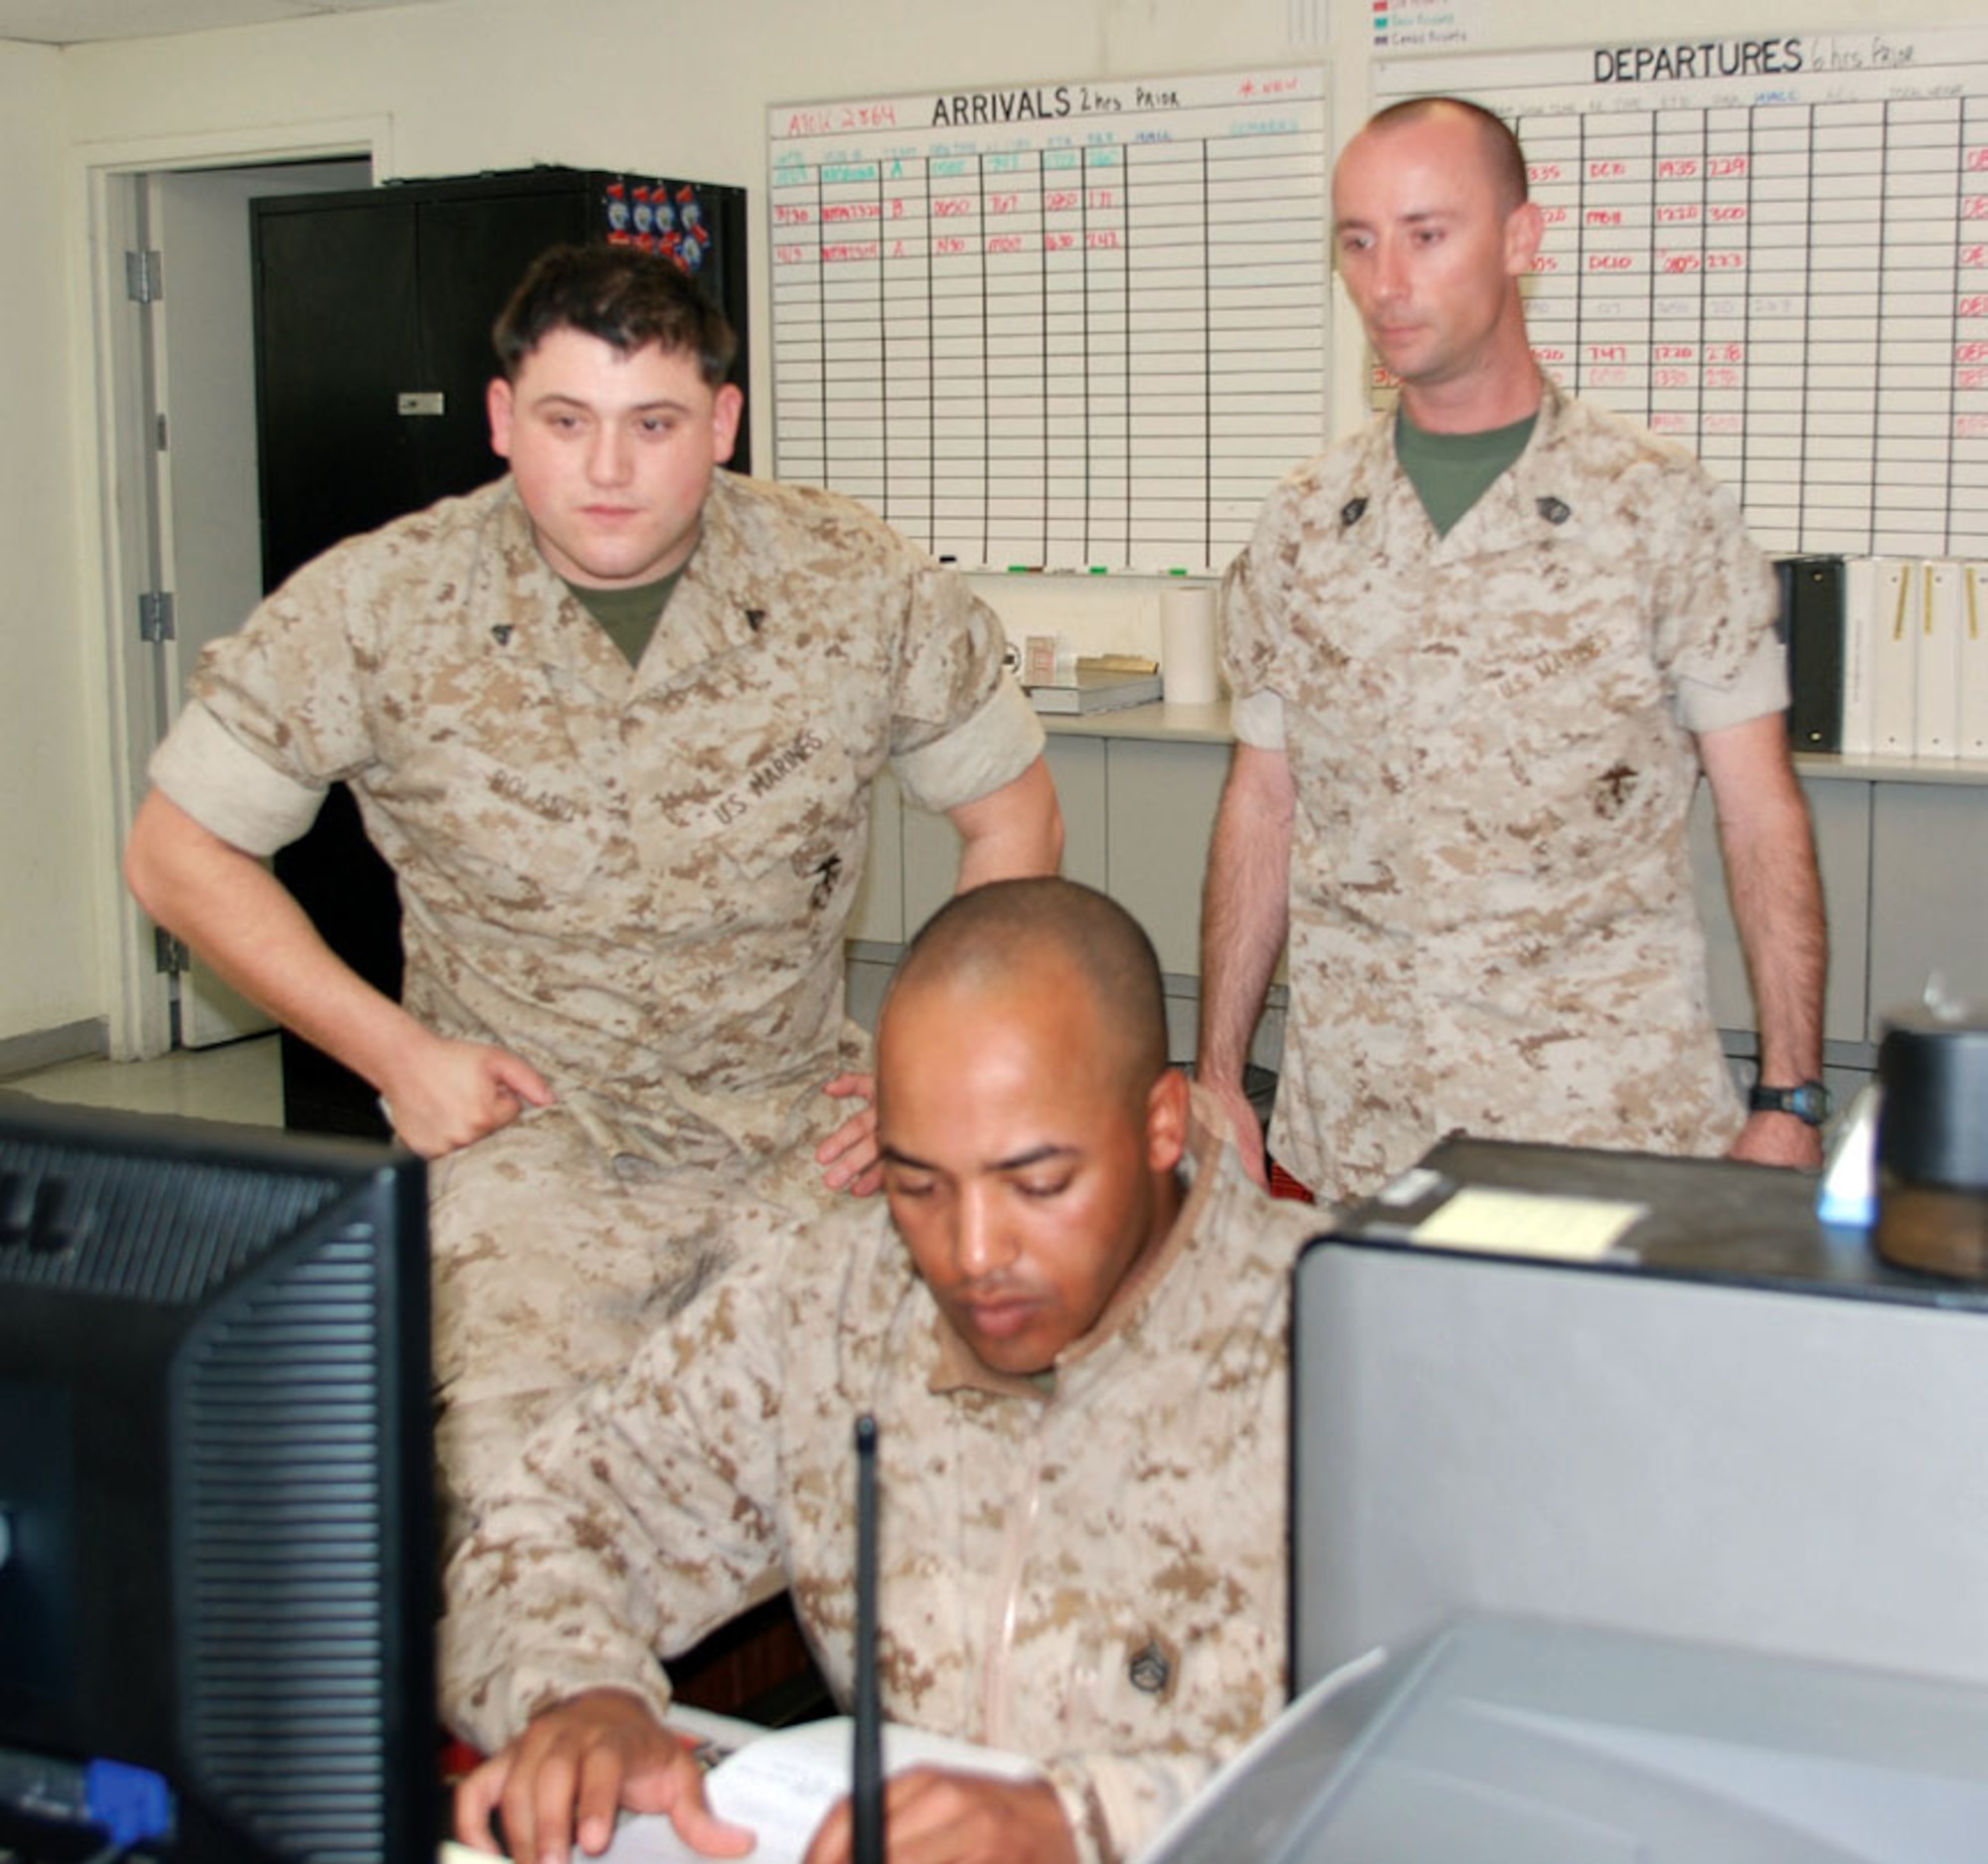 Cpl. Bryan Boland (left), Gunnery Sgt. Jeremiah Rick (back) and a visiting Marine check the single mobility system computer in the A/DACG office inside the deployment hangar. (U.S. Air Force photo by Megan Just)